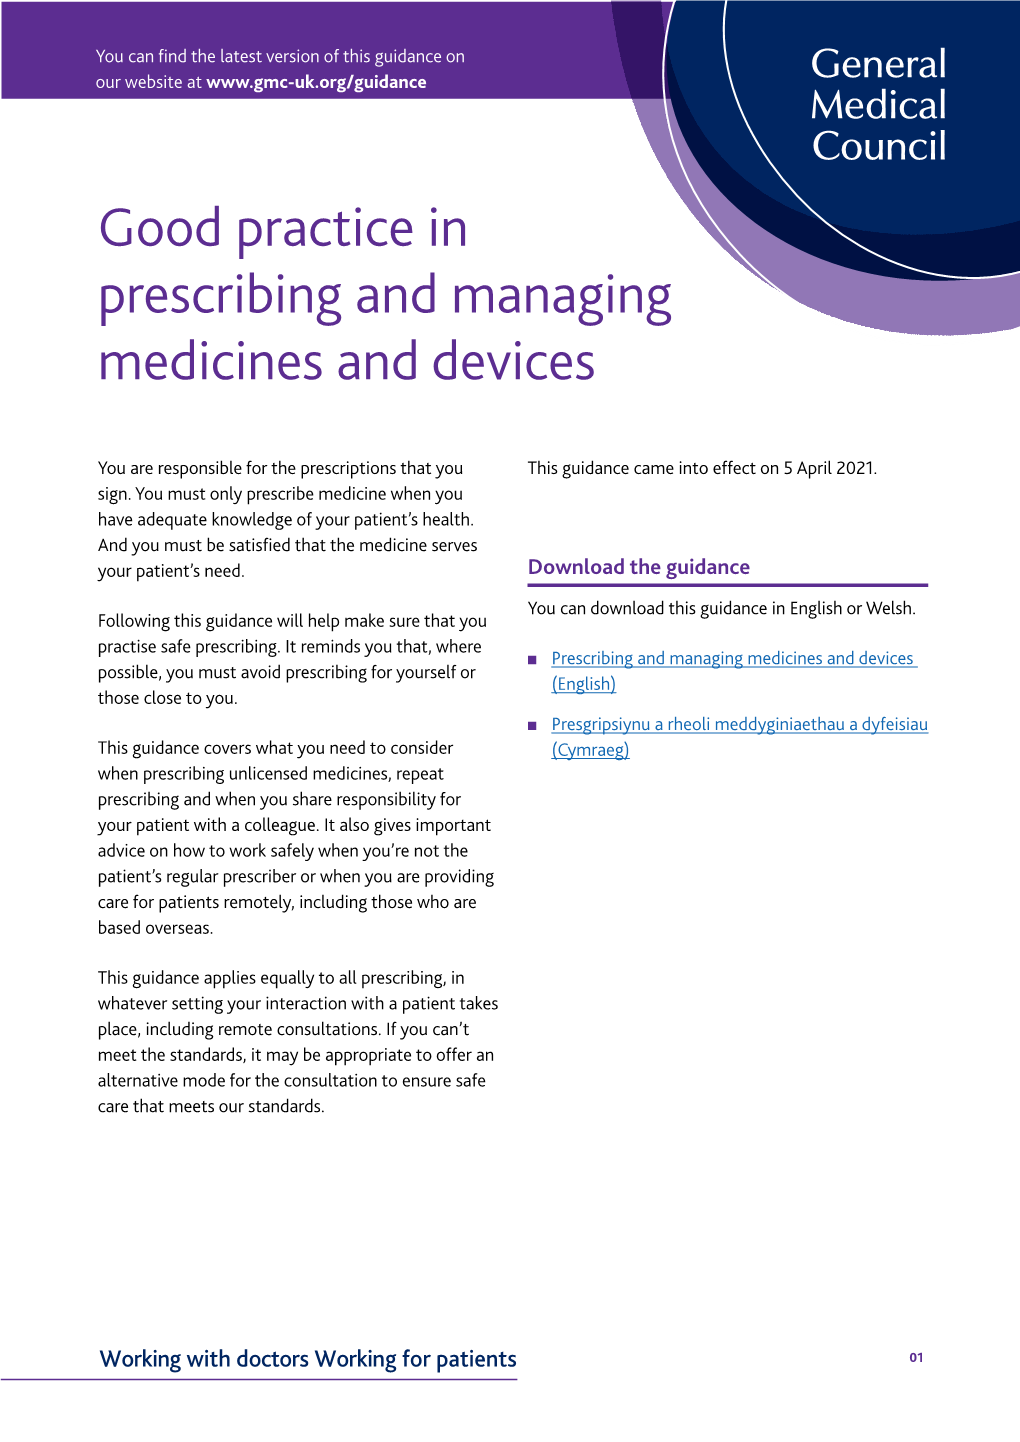 Good Practice in Prescribing and Managing Medicines and Devices